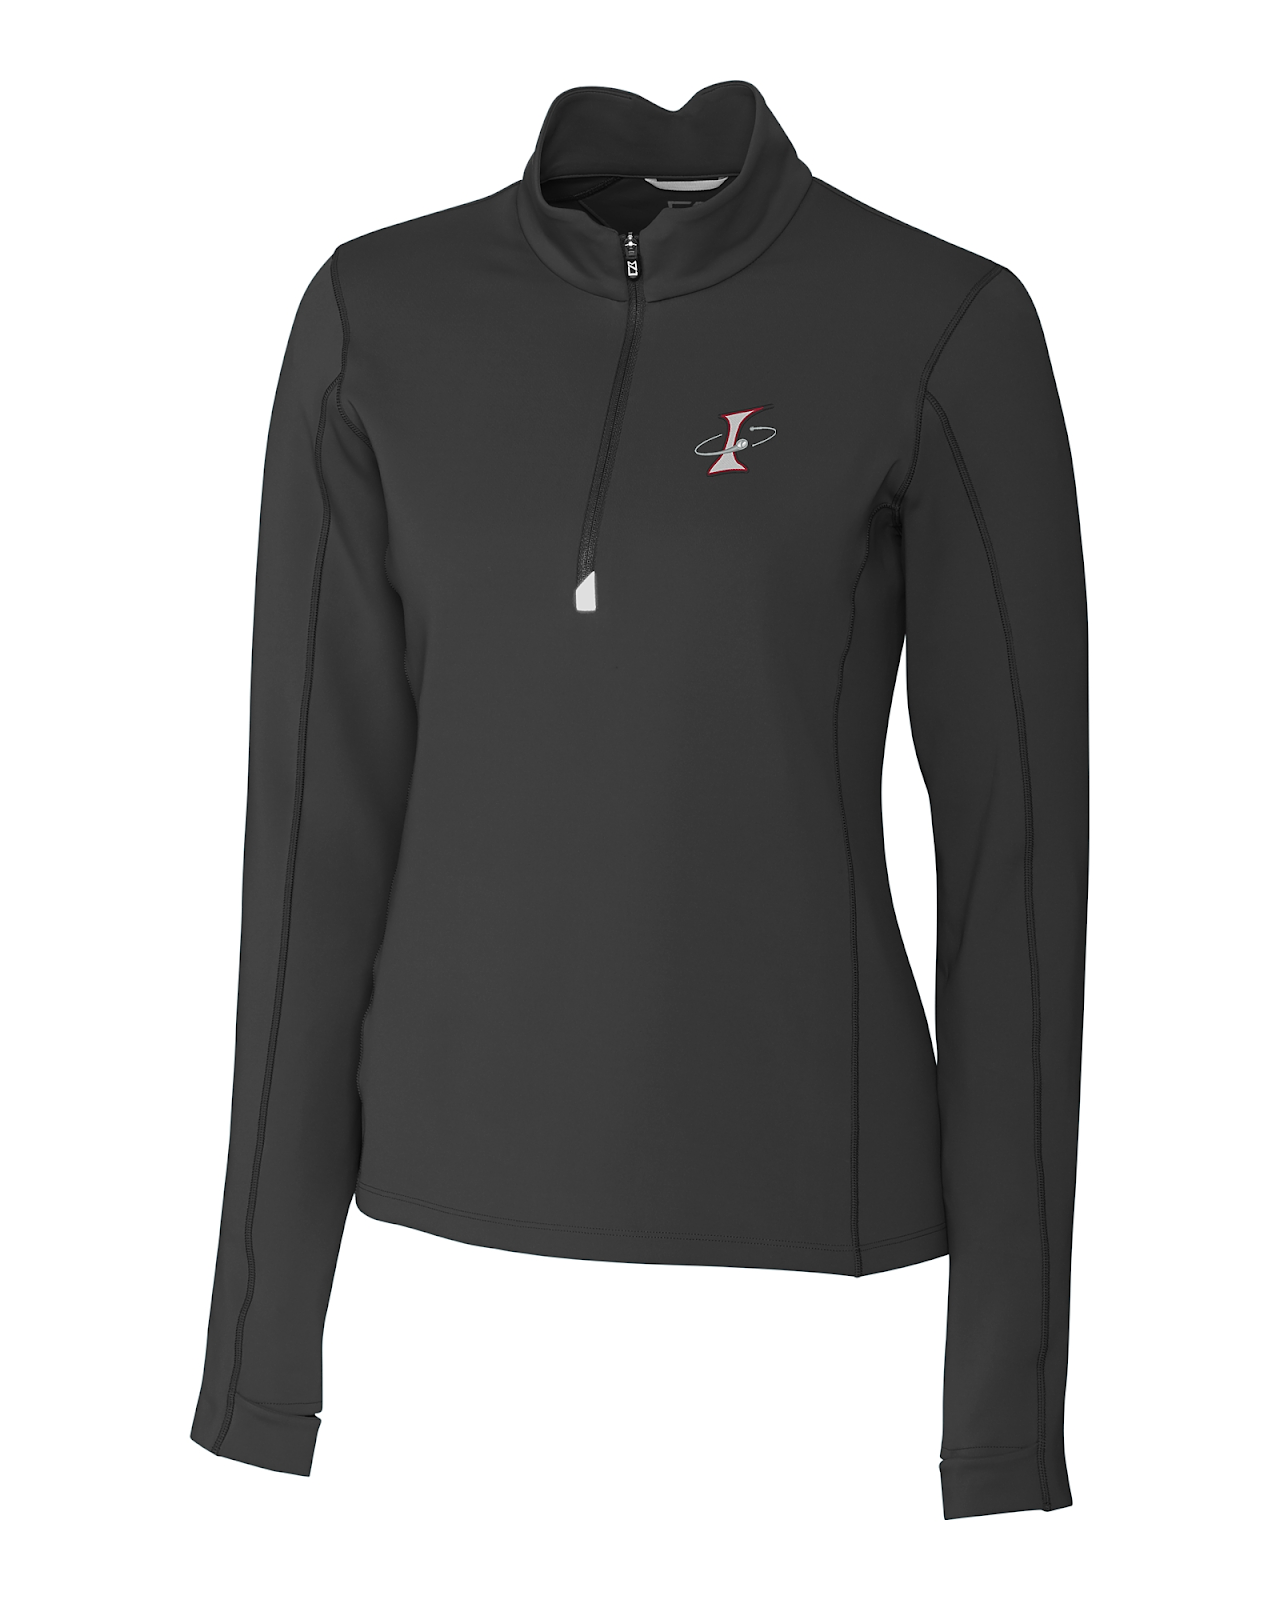 Albuquerque Isotopes Cutter & Buck Traverse Stretch Quarter Zip Womens Pullover in black